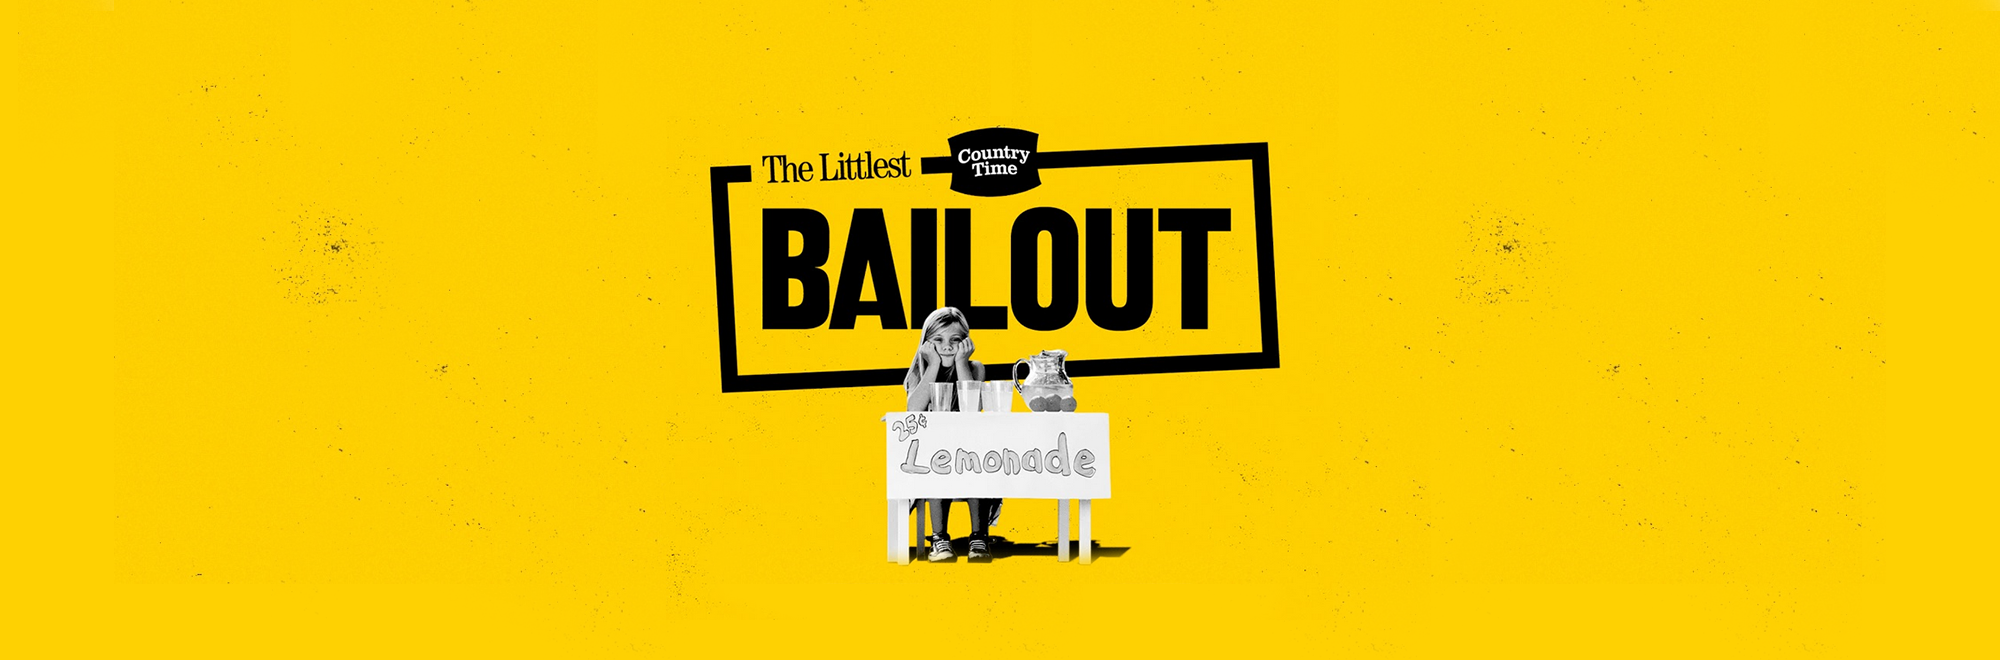 ‘The Littlest Bailout’ keeps enterprising kids in business and Country Time Lemonade in the headlines